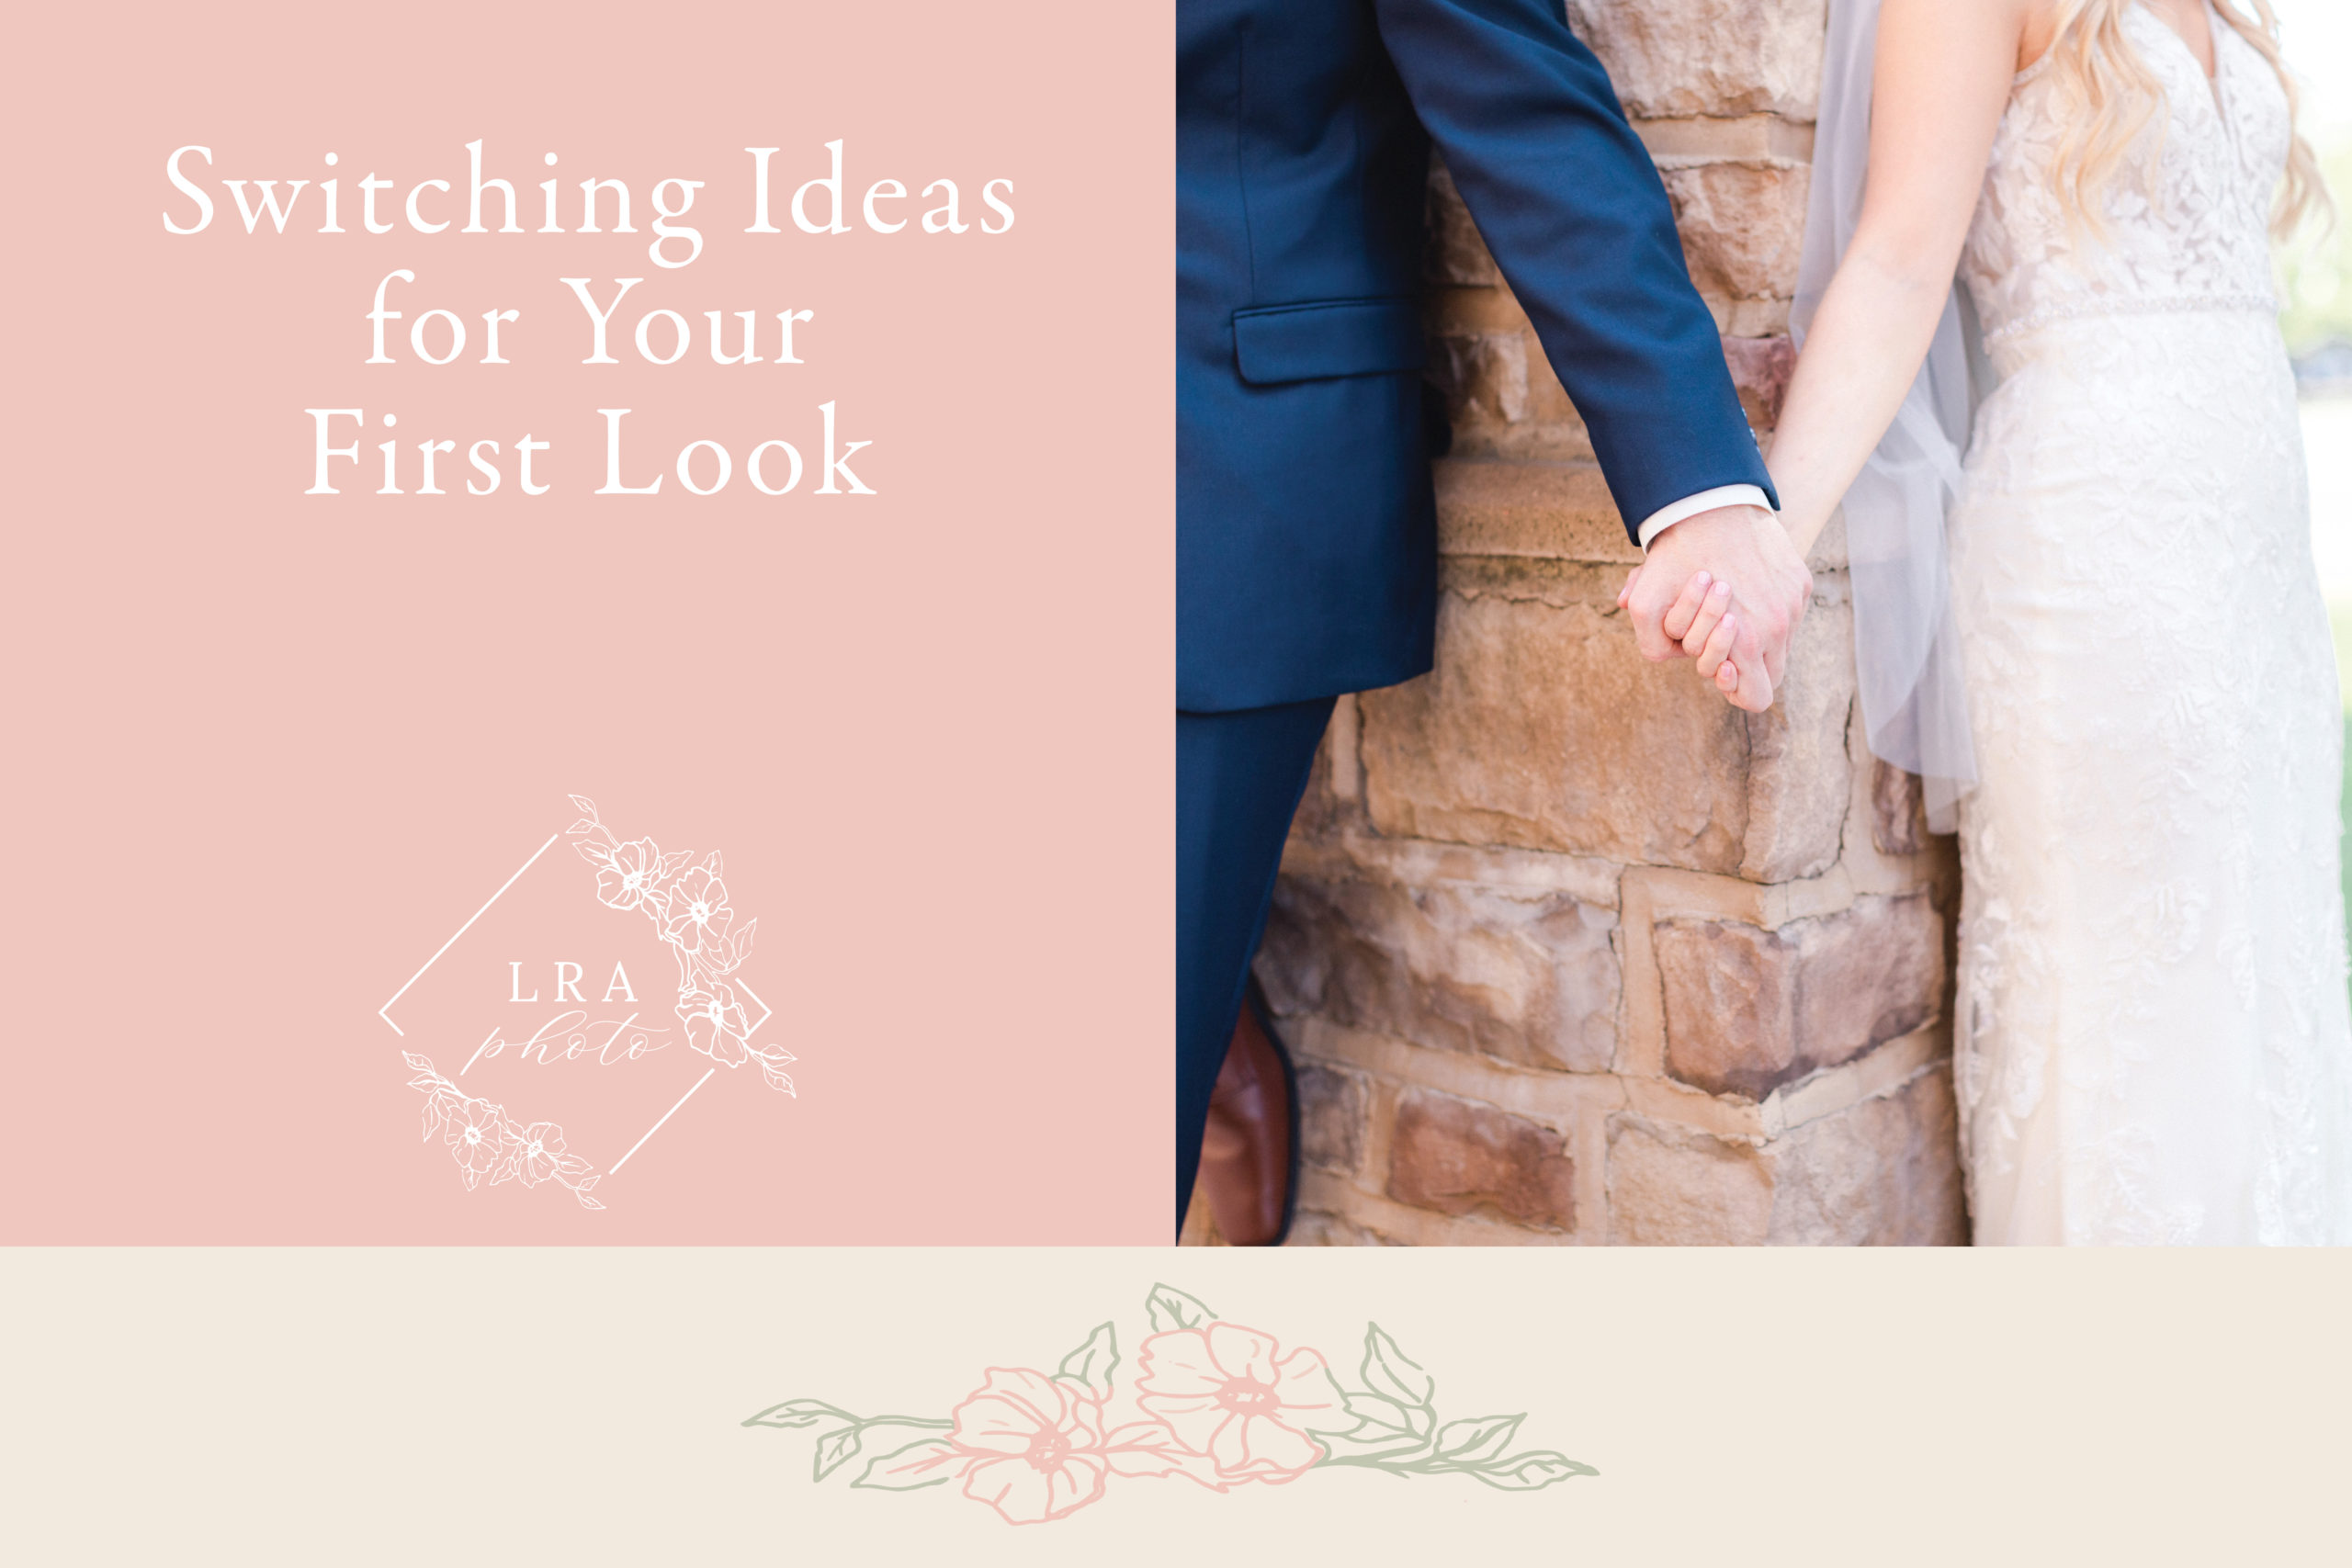 Switching ideas for your first look